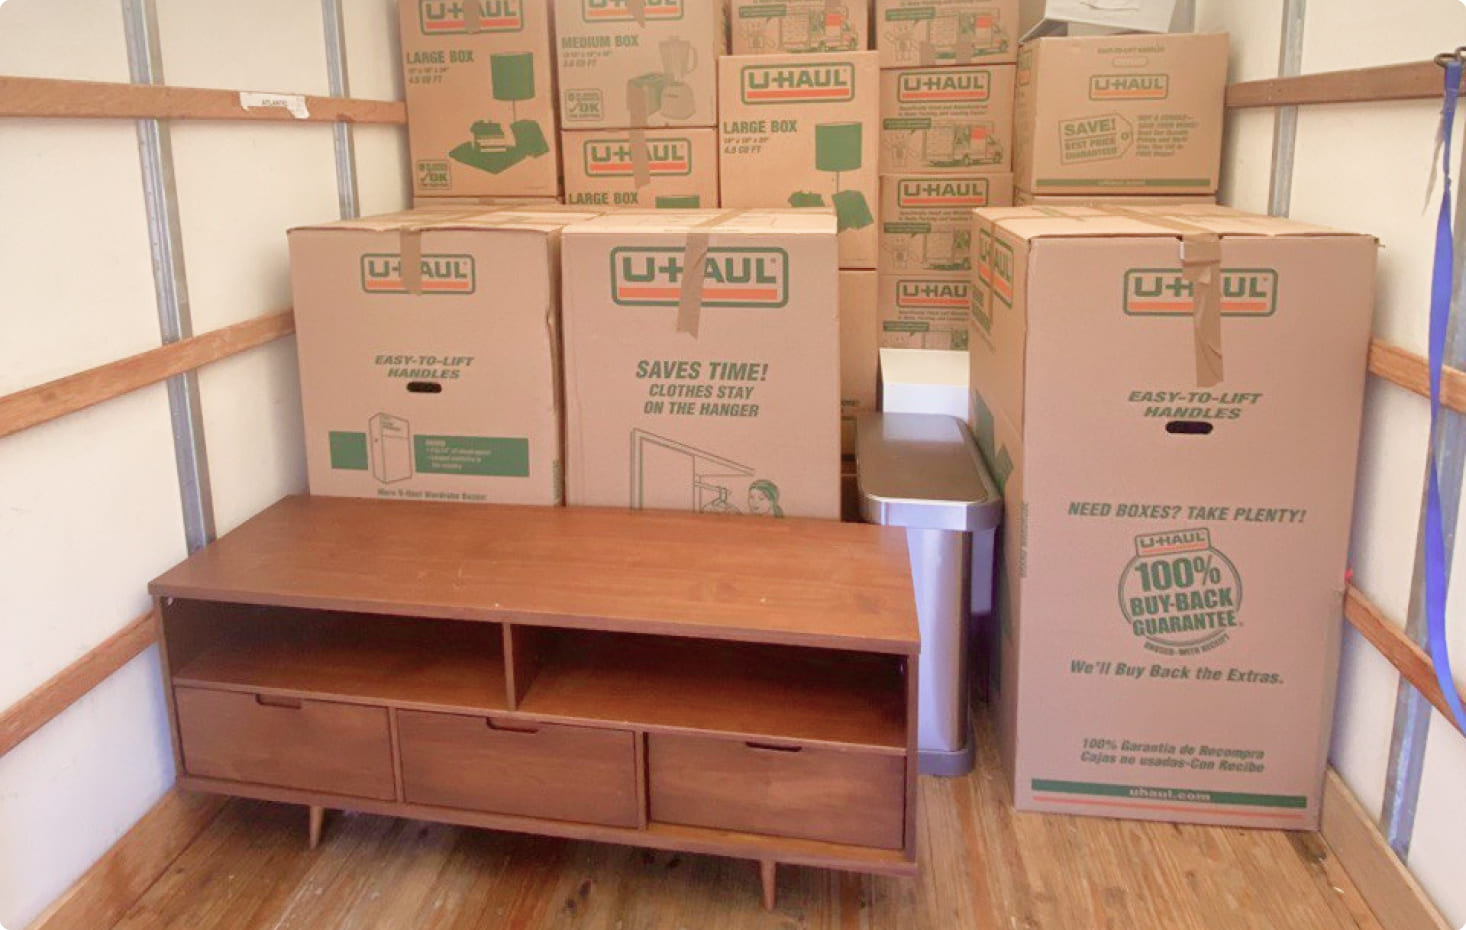 The layout of boxes in a truck